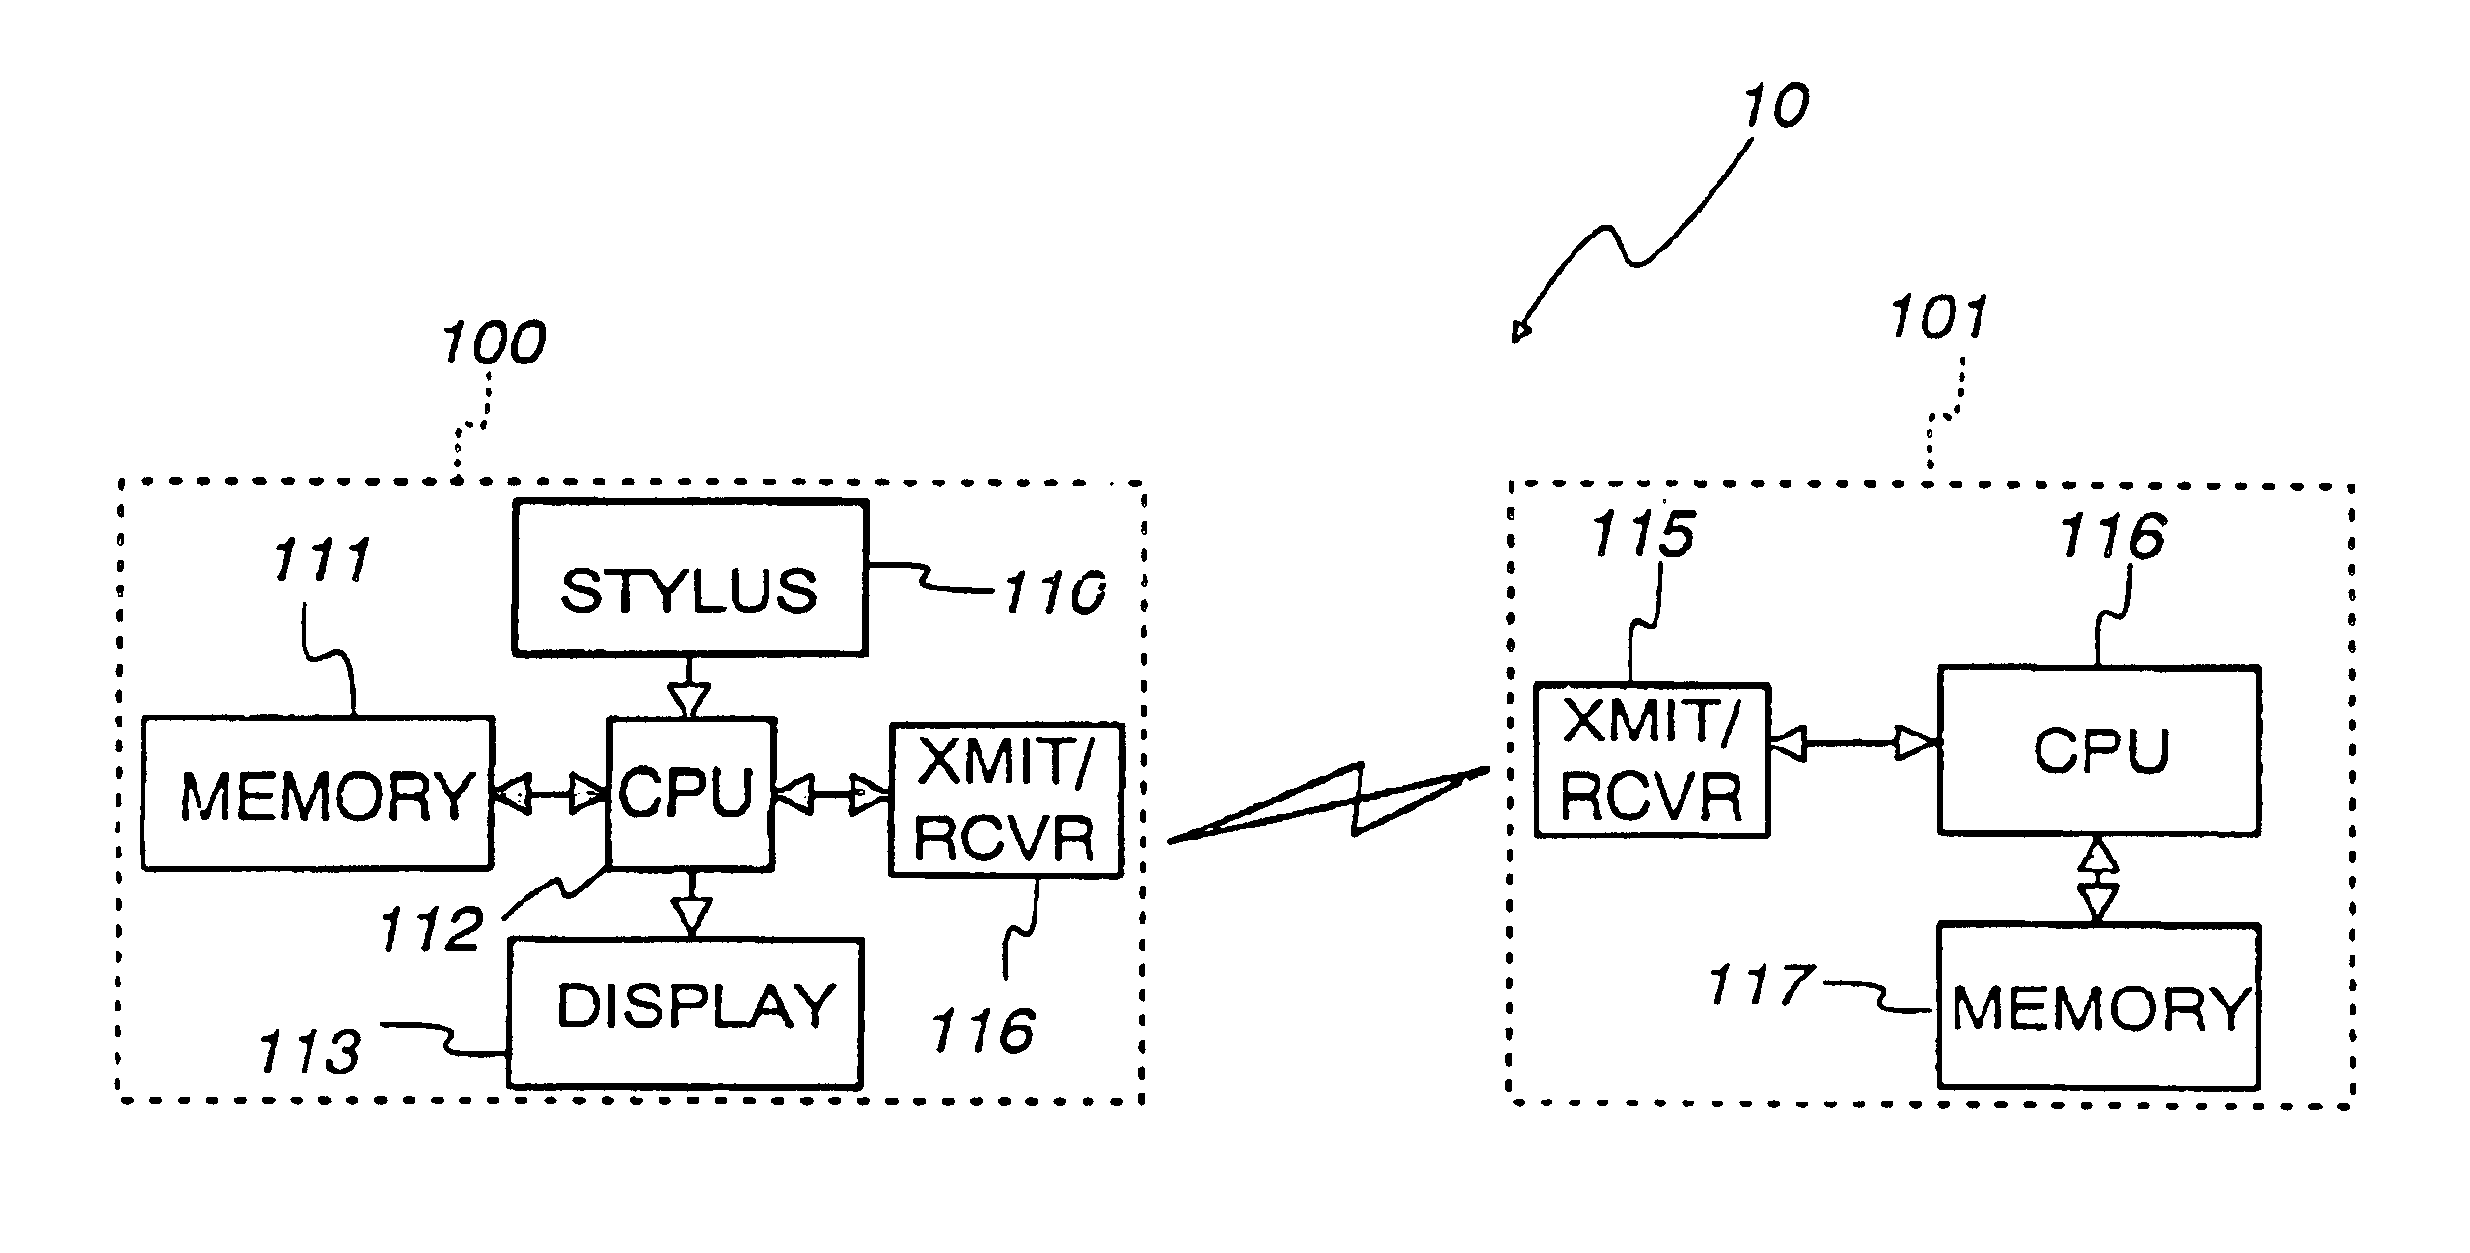 Mode switching for pen-based computer systems